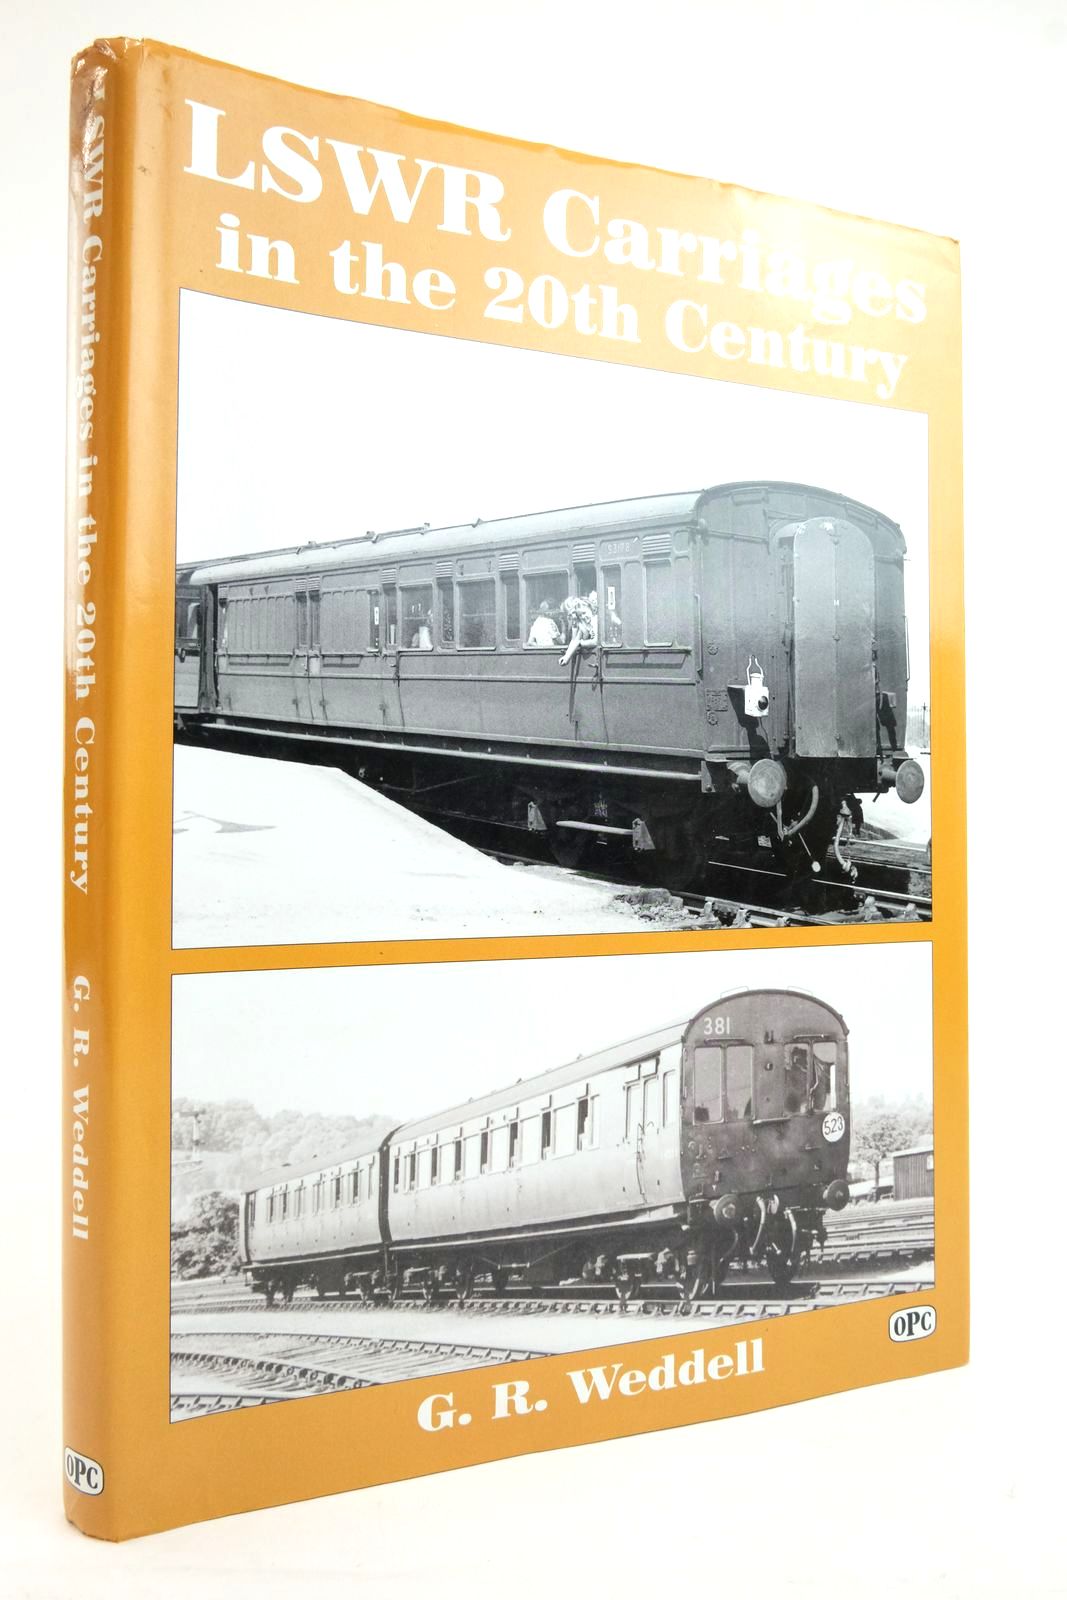 Photo of L.S.W.R. CARRIAGES IN THE 20TH CENTURY written by Weddell, G.R. published by Oxford Publishing Co (STOCK CODE: 2136124)  for sale by Stella & Rose's Books